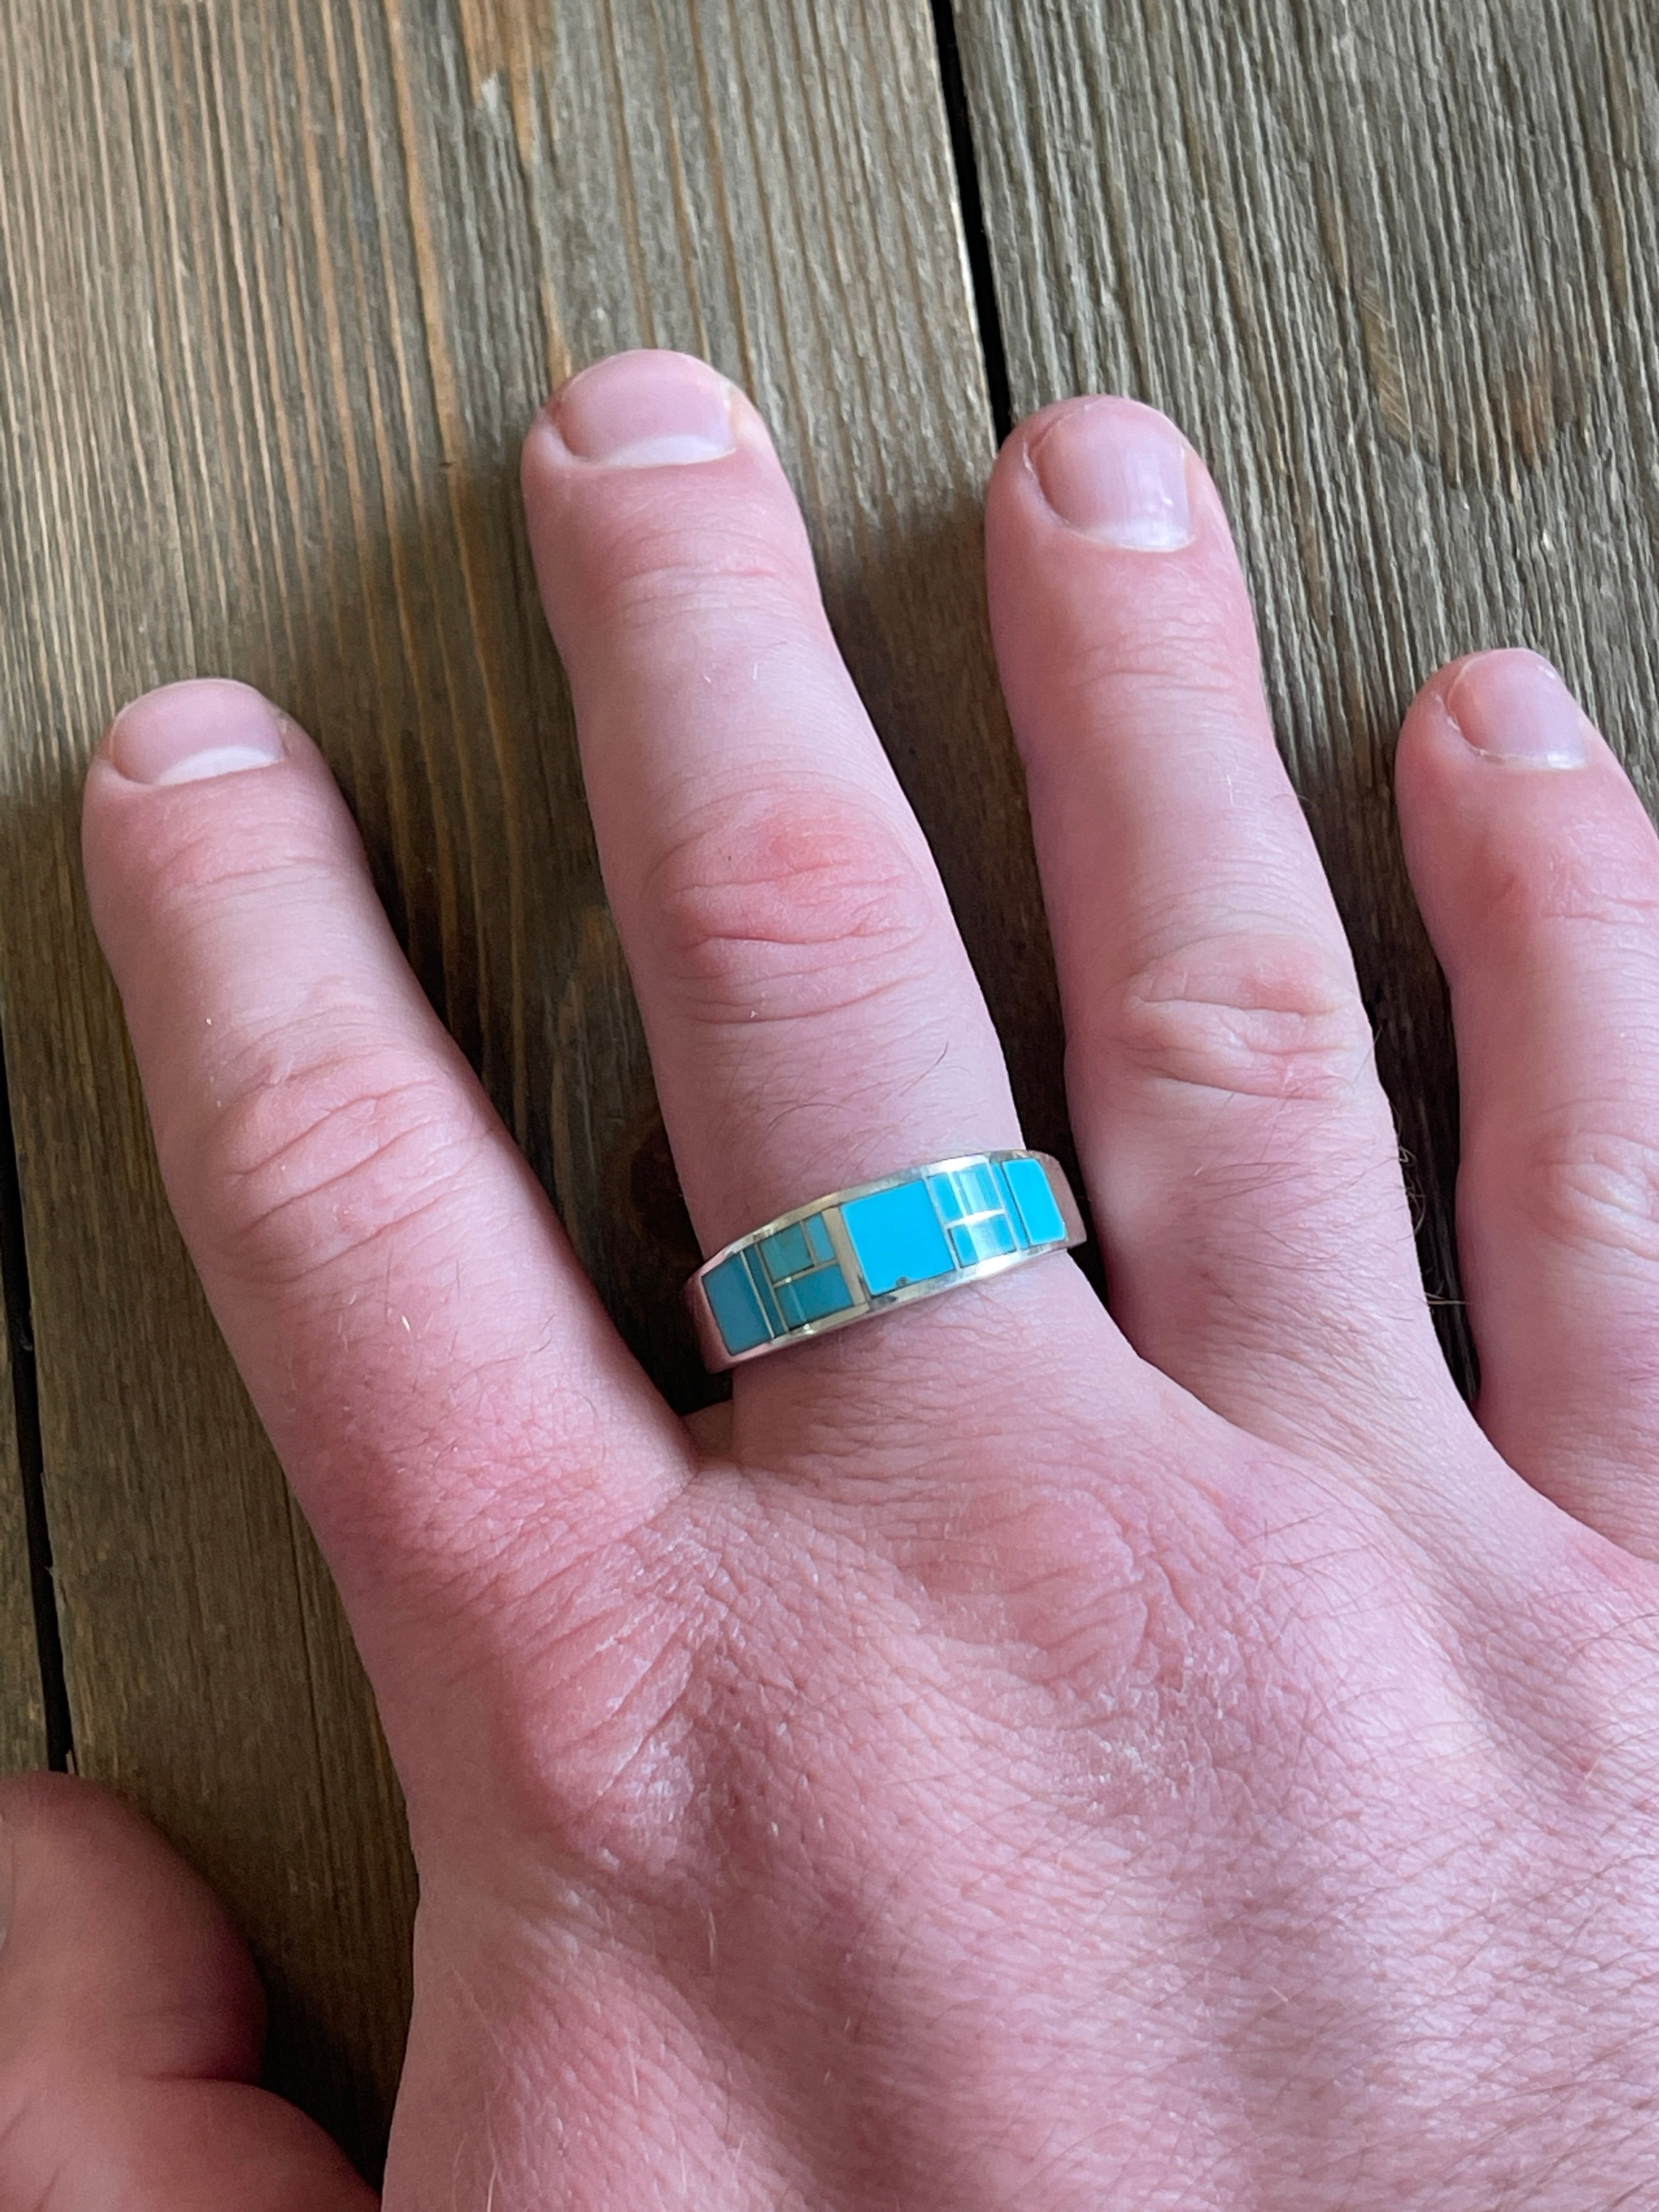 Navajo Turquoise & Sterling Silver Inlay Ring Size 14